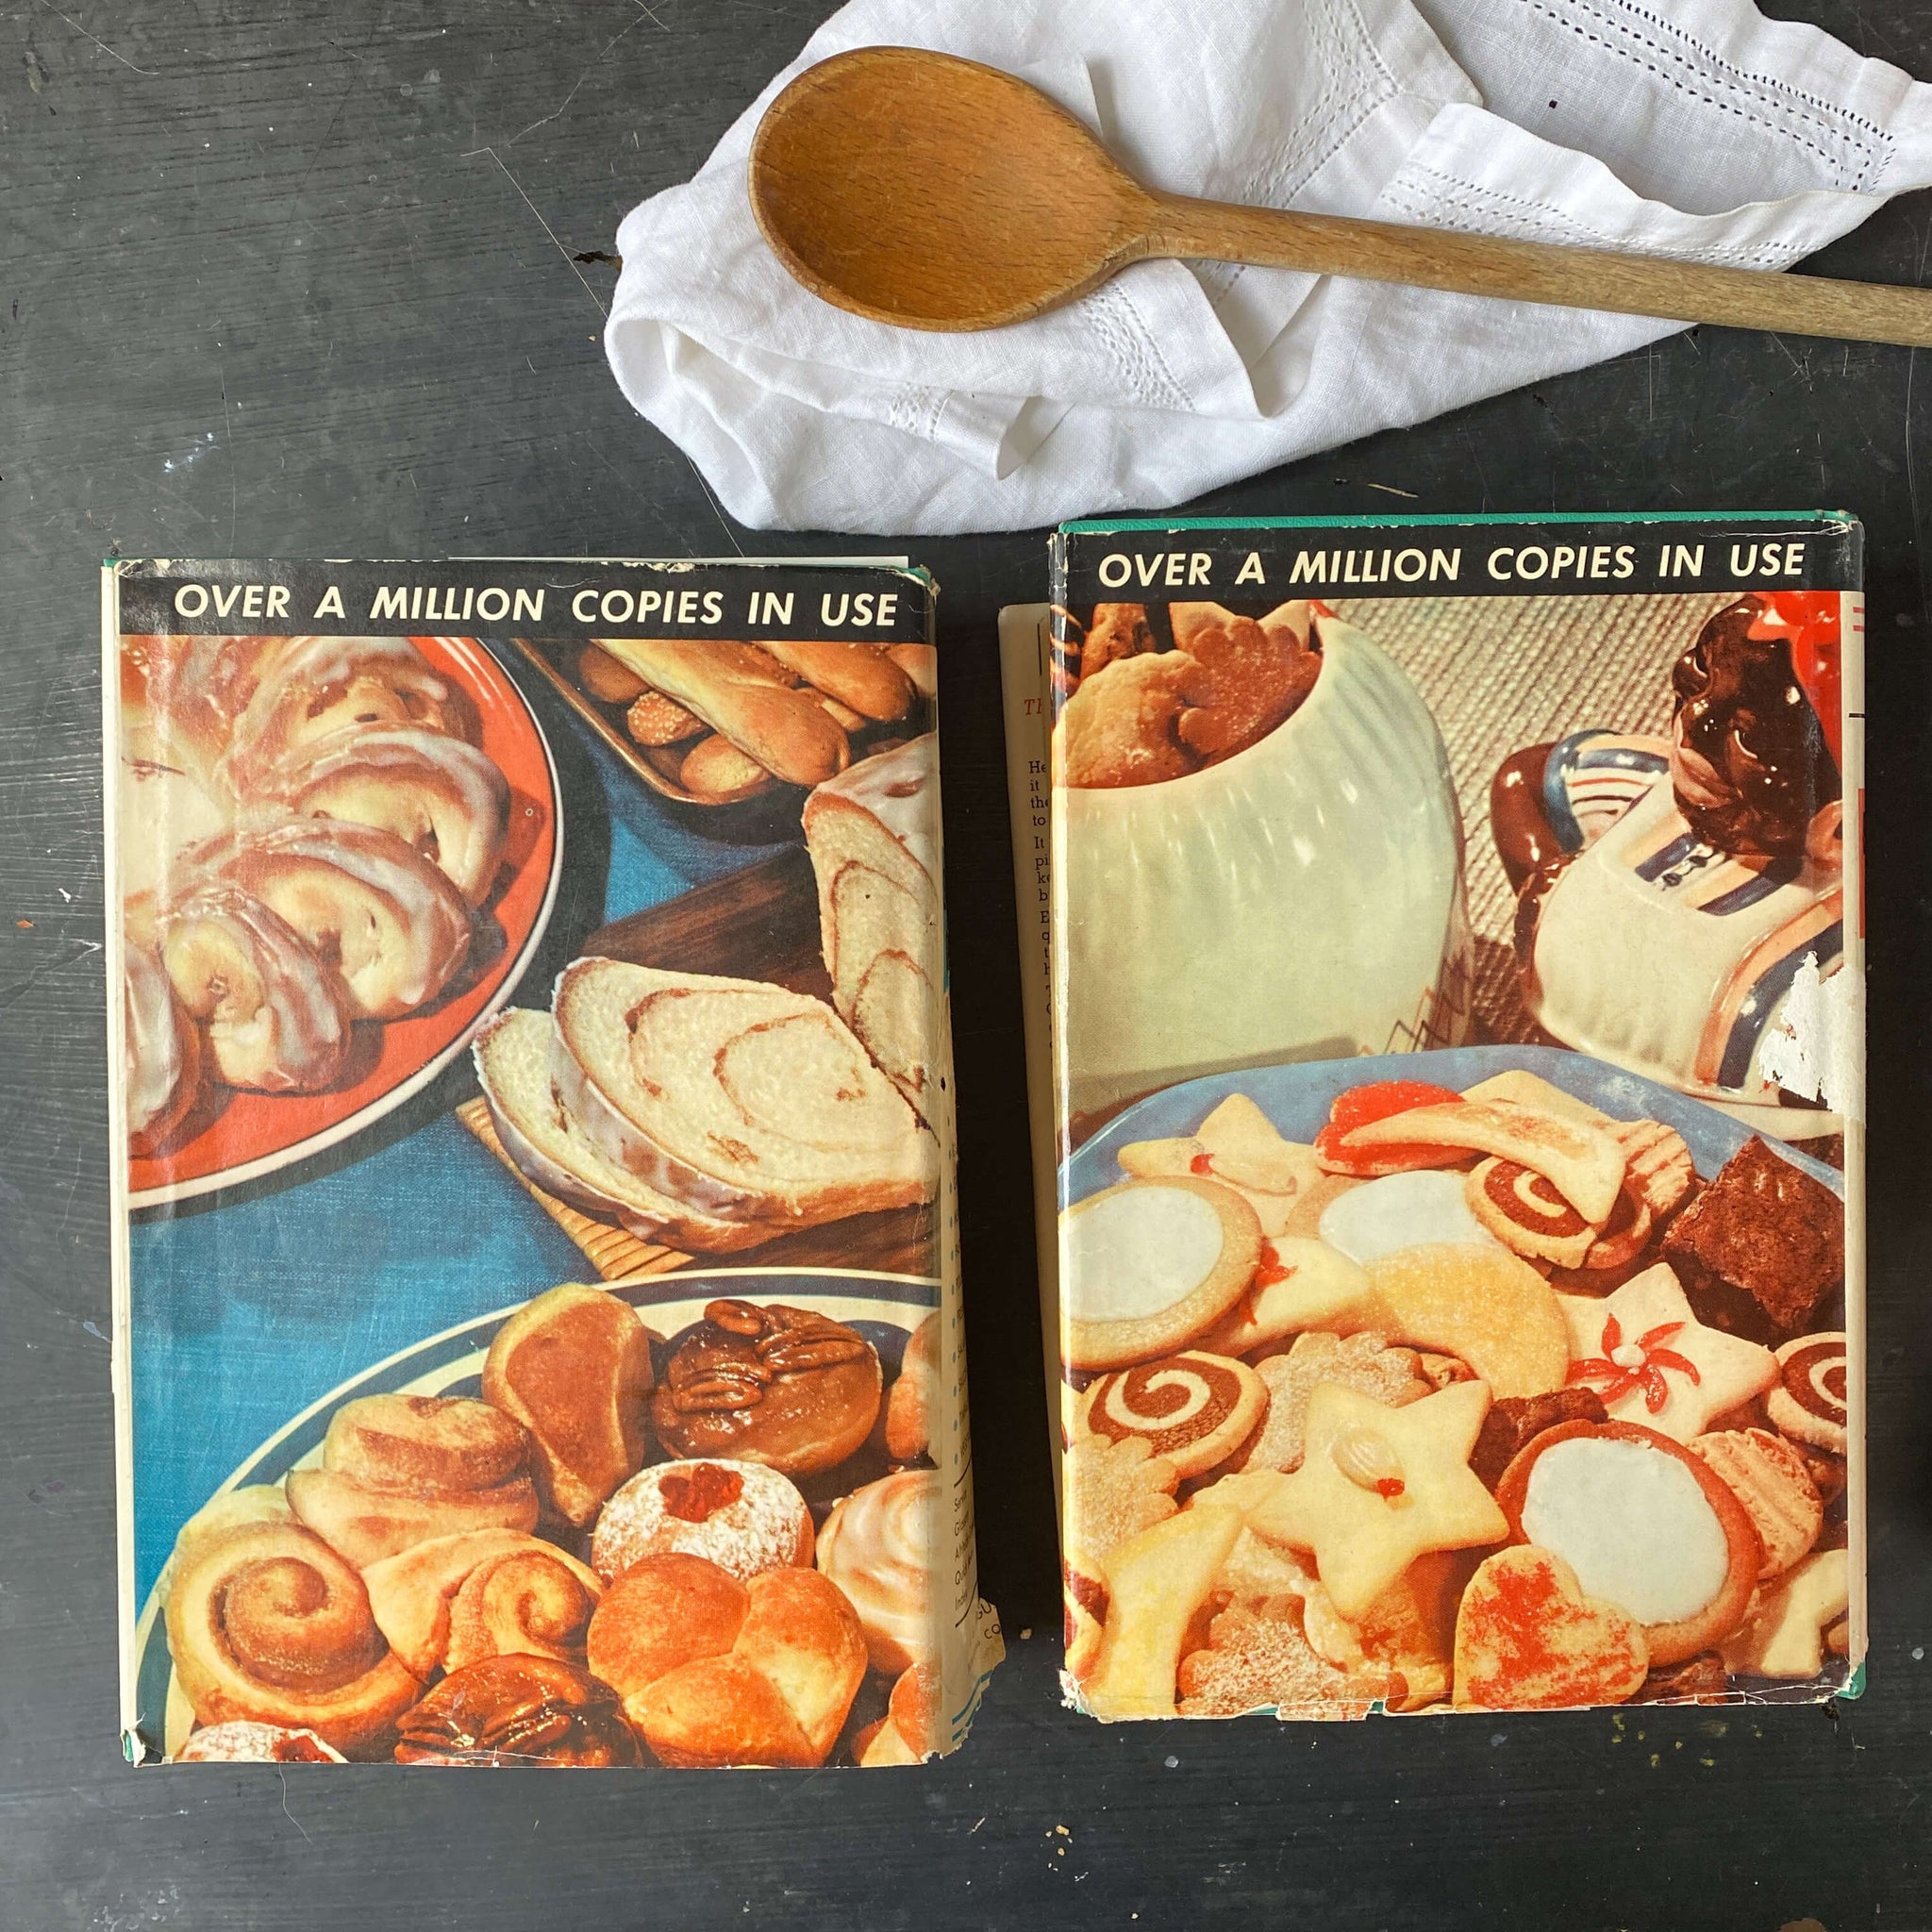 Meta Given's Modern Encyclopedia of Cooking - 1959 Edition - Two Volume Set - Book Club Edition